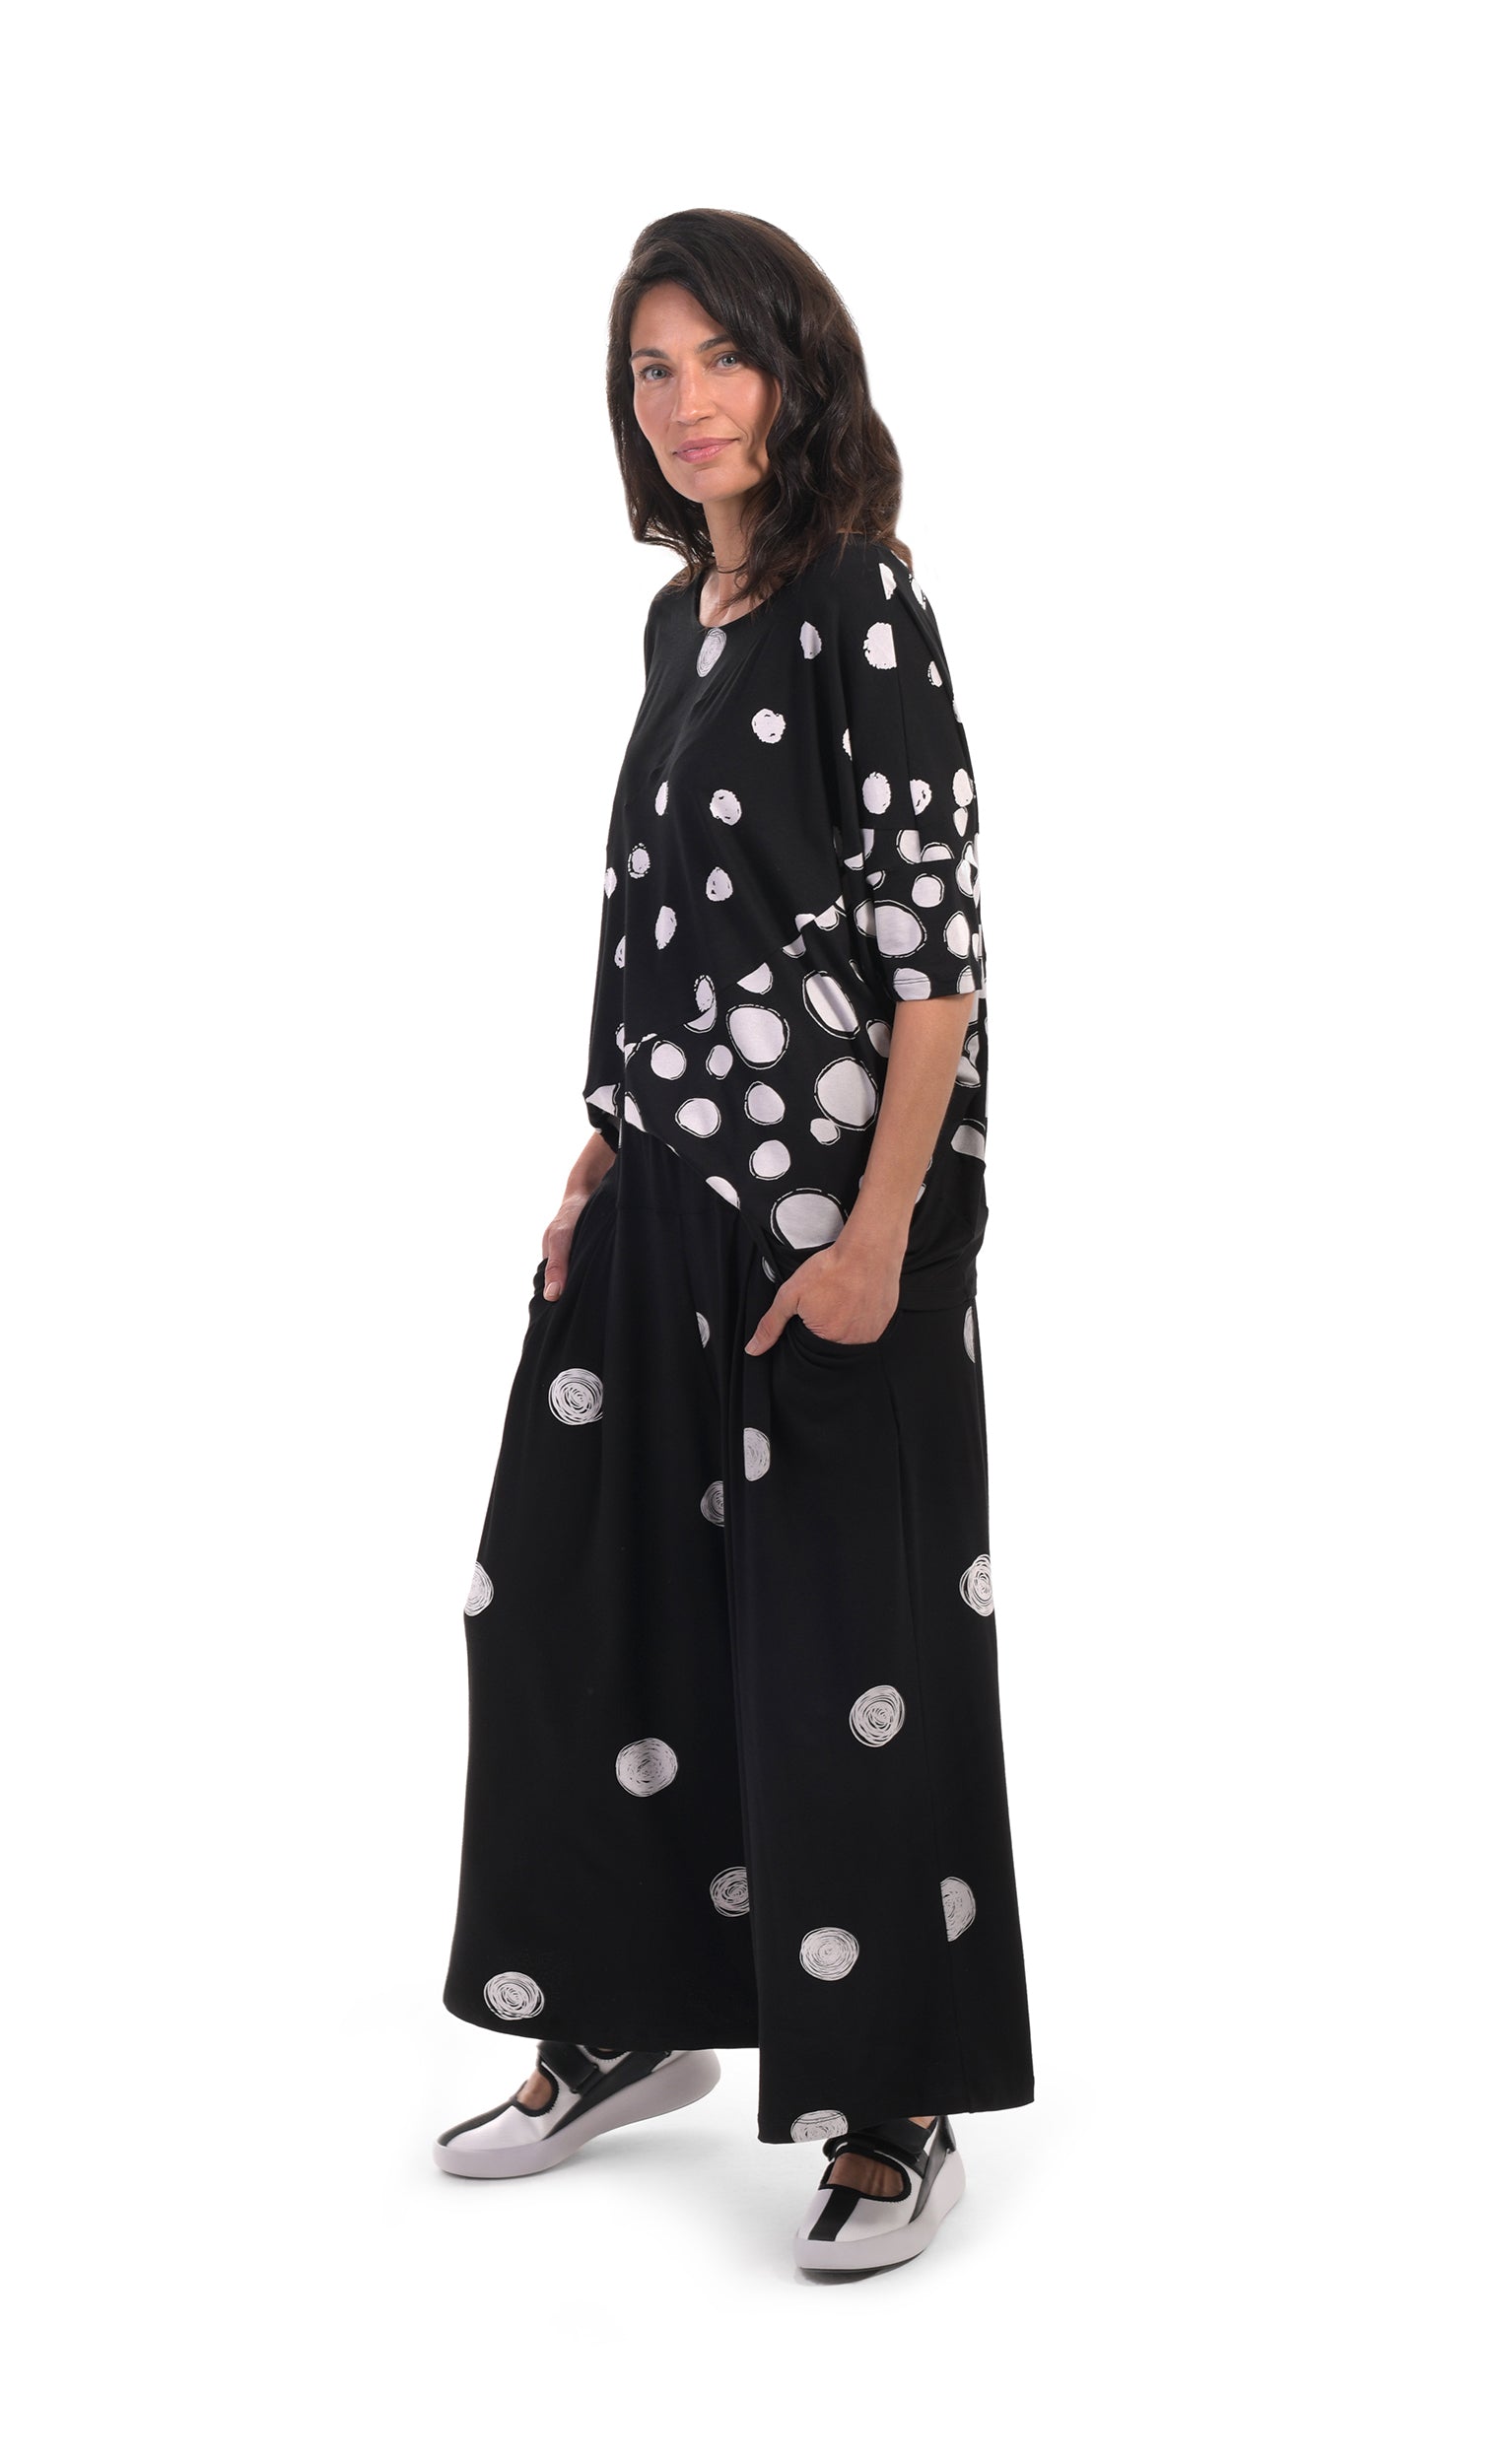 Front, left sided, full body view of a woman wearing the alembika multi spotted lia jersey top. This top is black with different types of white spots all over it. The sleeves are 3/4 length and the shirt has an oversized fit. On the bottom she is wearing full leg black pants with white dots.